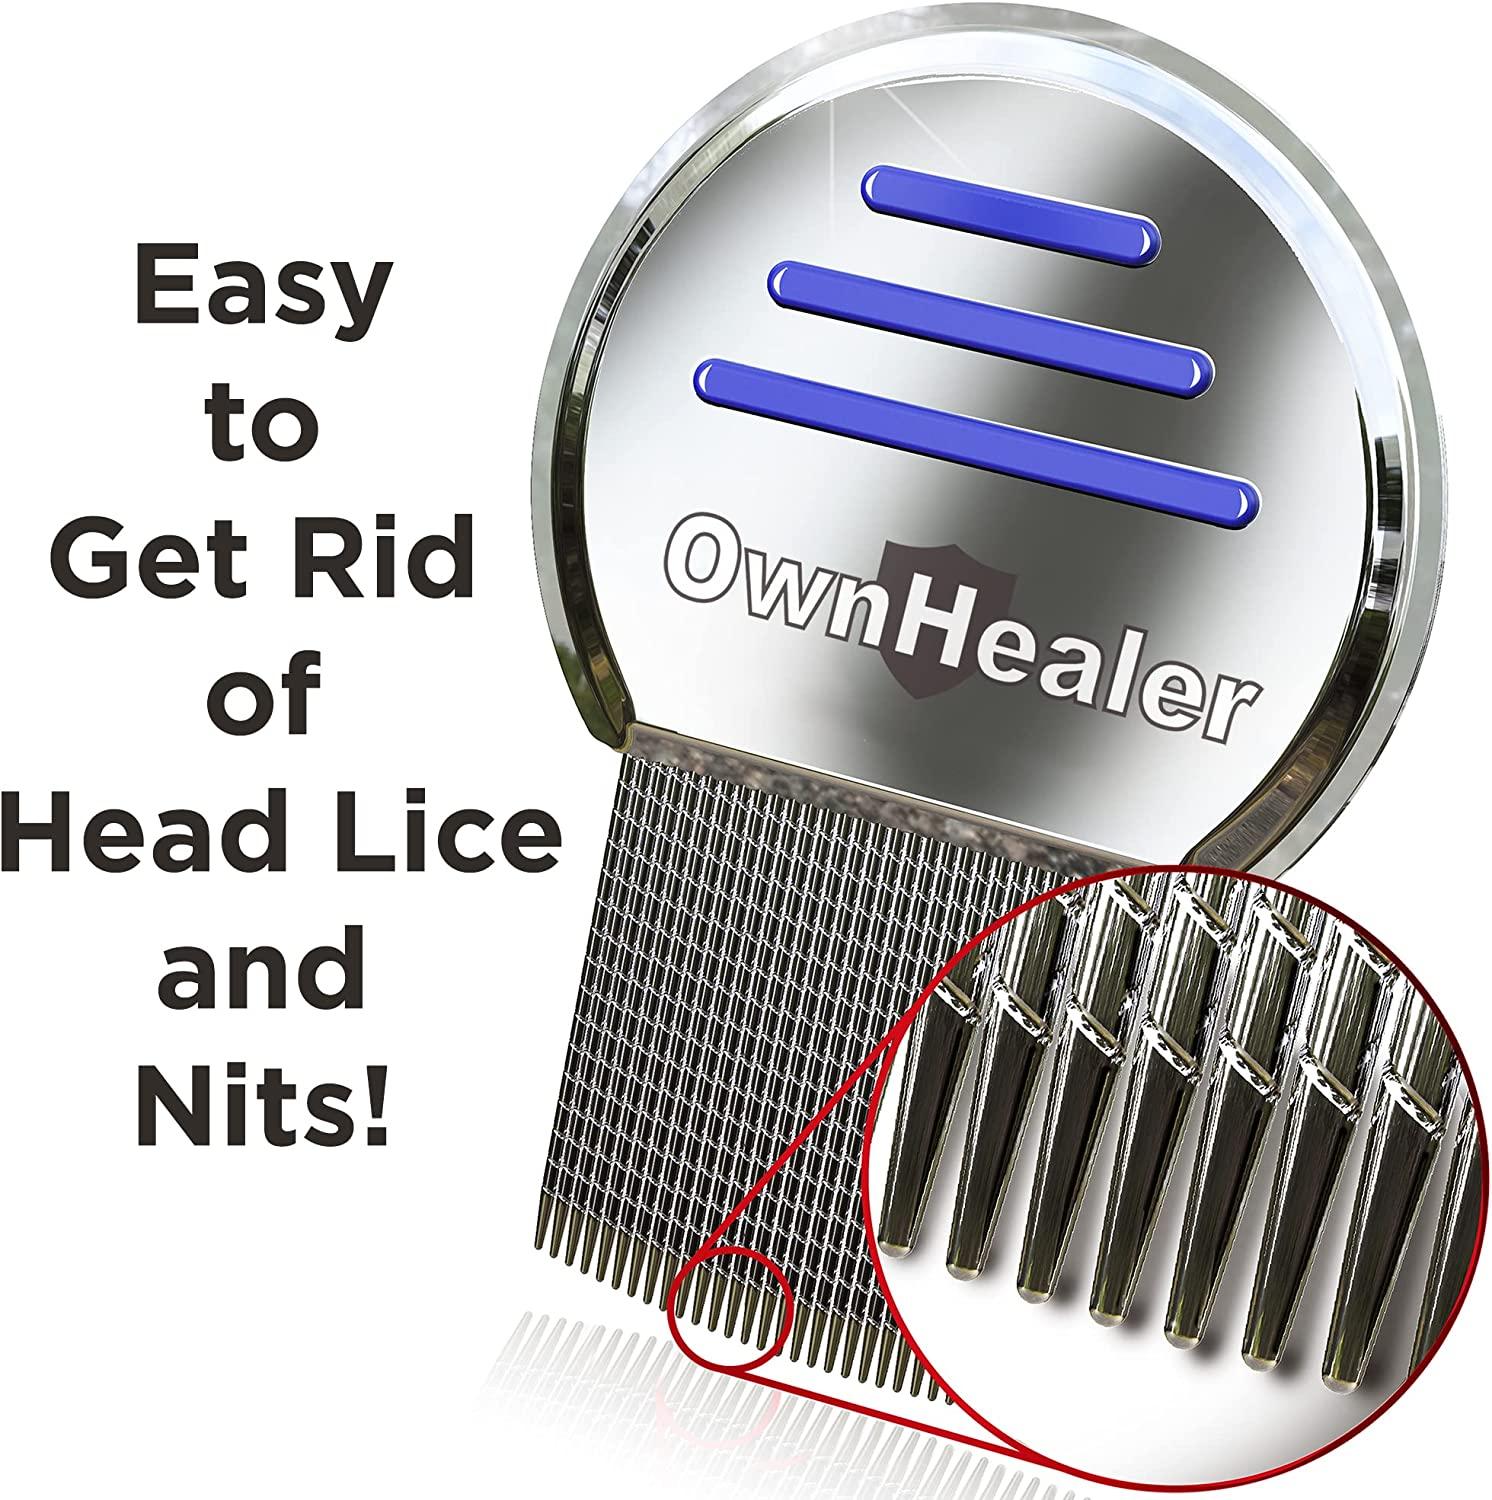  OWNHEALER Professional Lice Comb Kit - for Lice, Nits, and  Dandruff Removal. Quick Results for Head Lice Treatment - Suitable for All  Hair Types. Peine para piojos y liendres. : Health